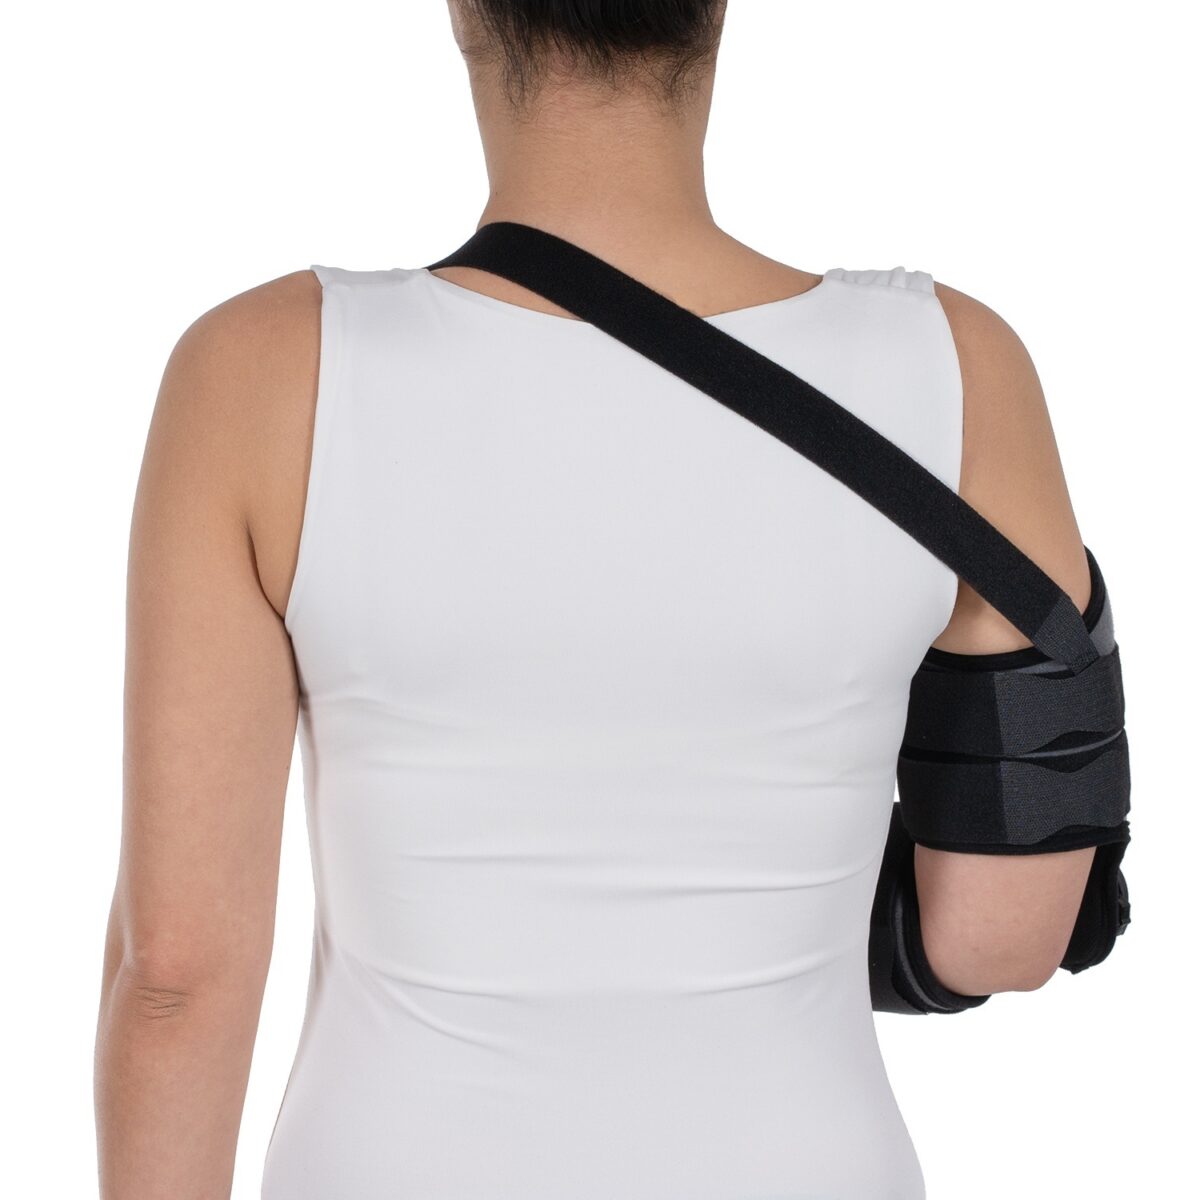 wingmed orthopedic equipments W218 adjustable elbow contracture splint with hand support 96